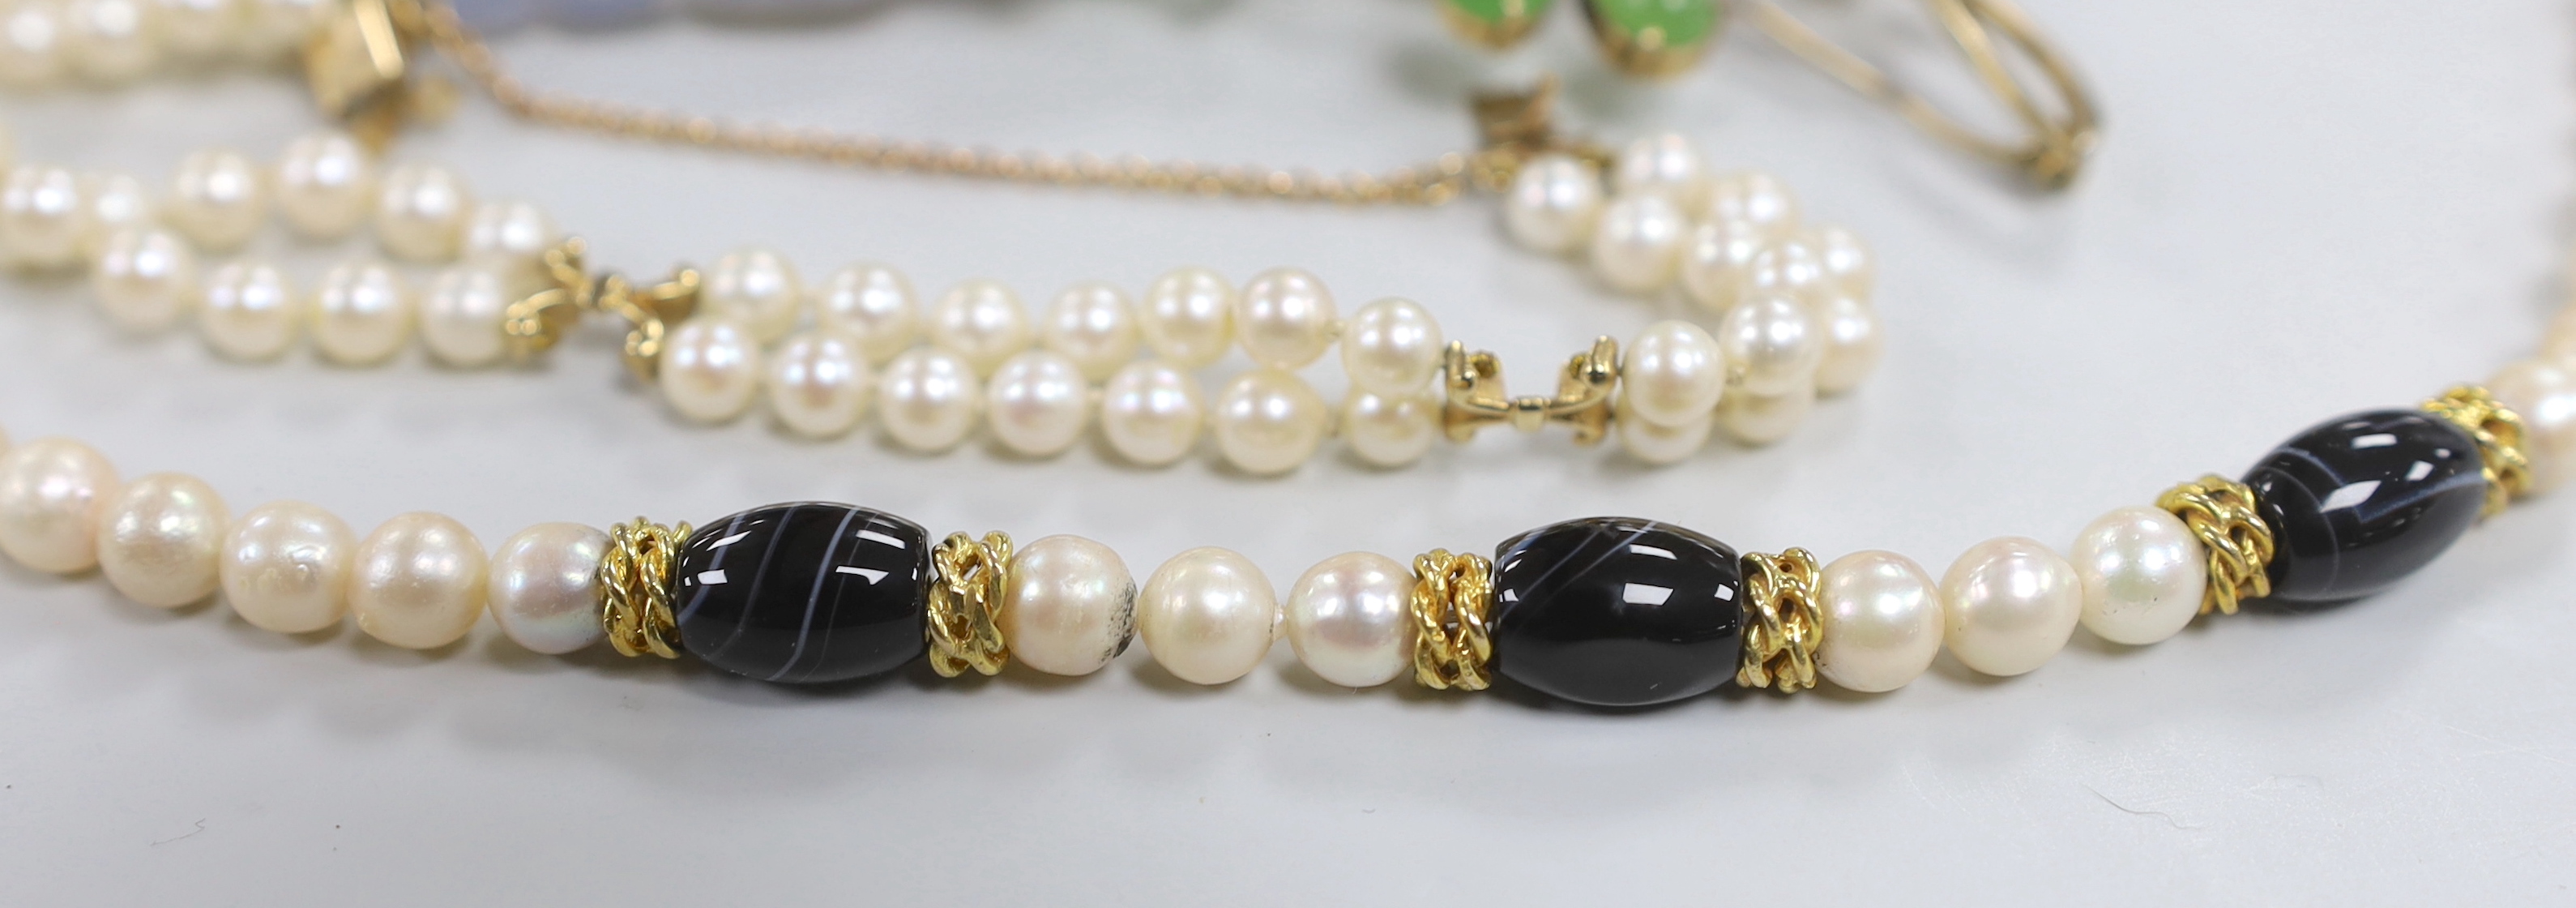 A modern single strand cultured pearl and agate bead necklace with 9ct gold and cultured pearl cluster set clasp and yellow metal spacers, 48cm, a twin strand cultured pearl bracelet, jade carving and a brooch.